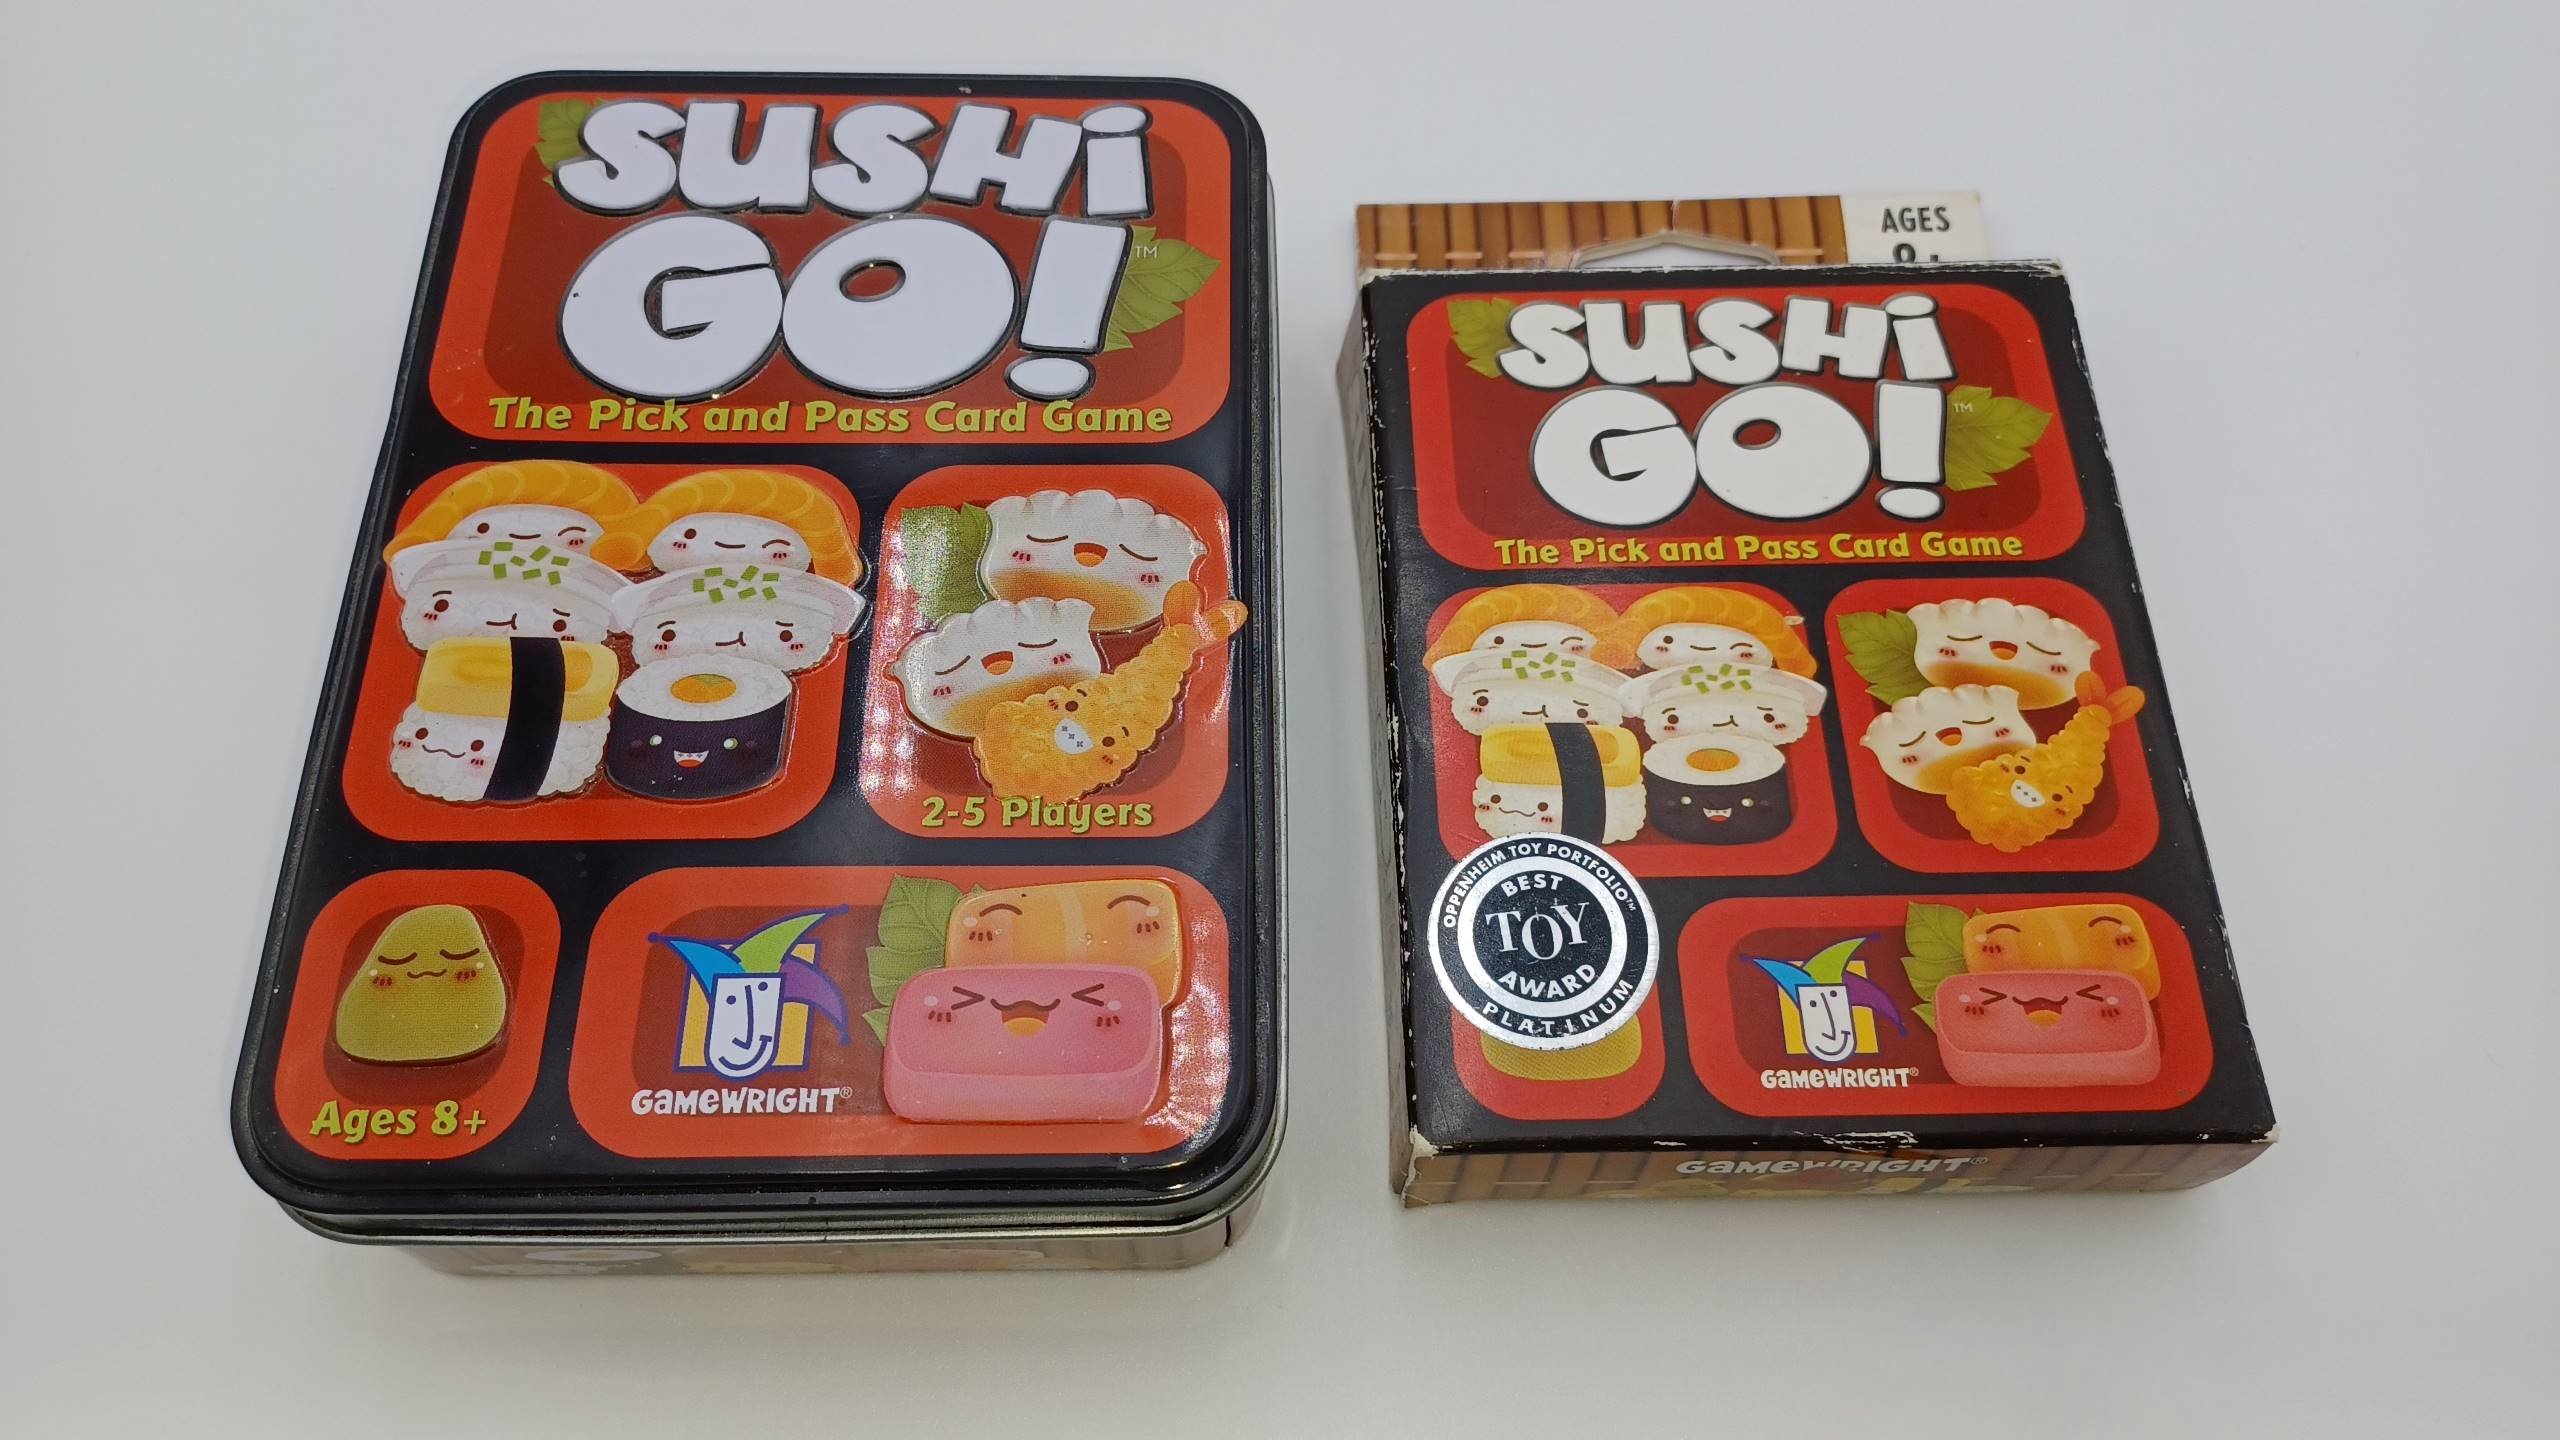 Box for Sushi Go!